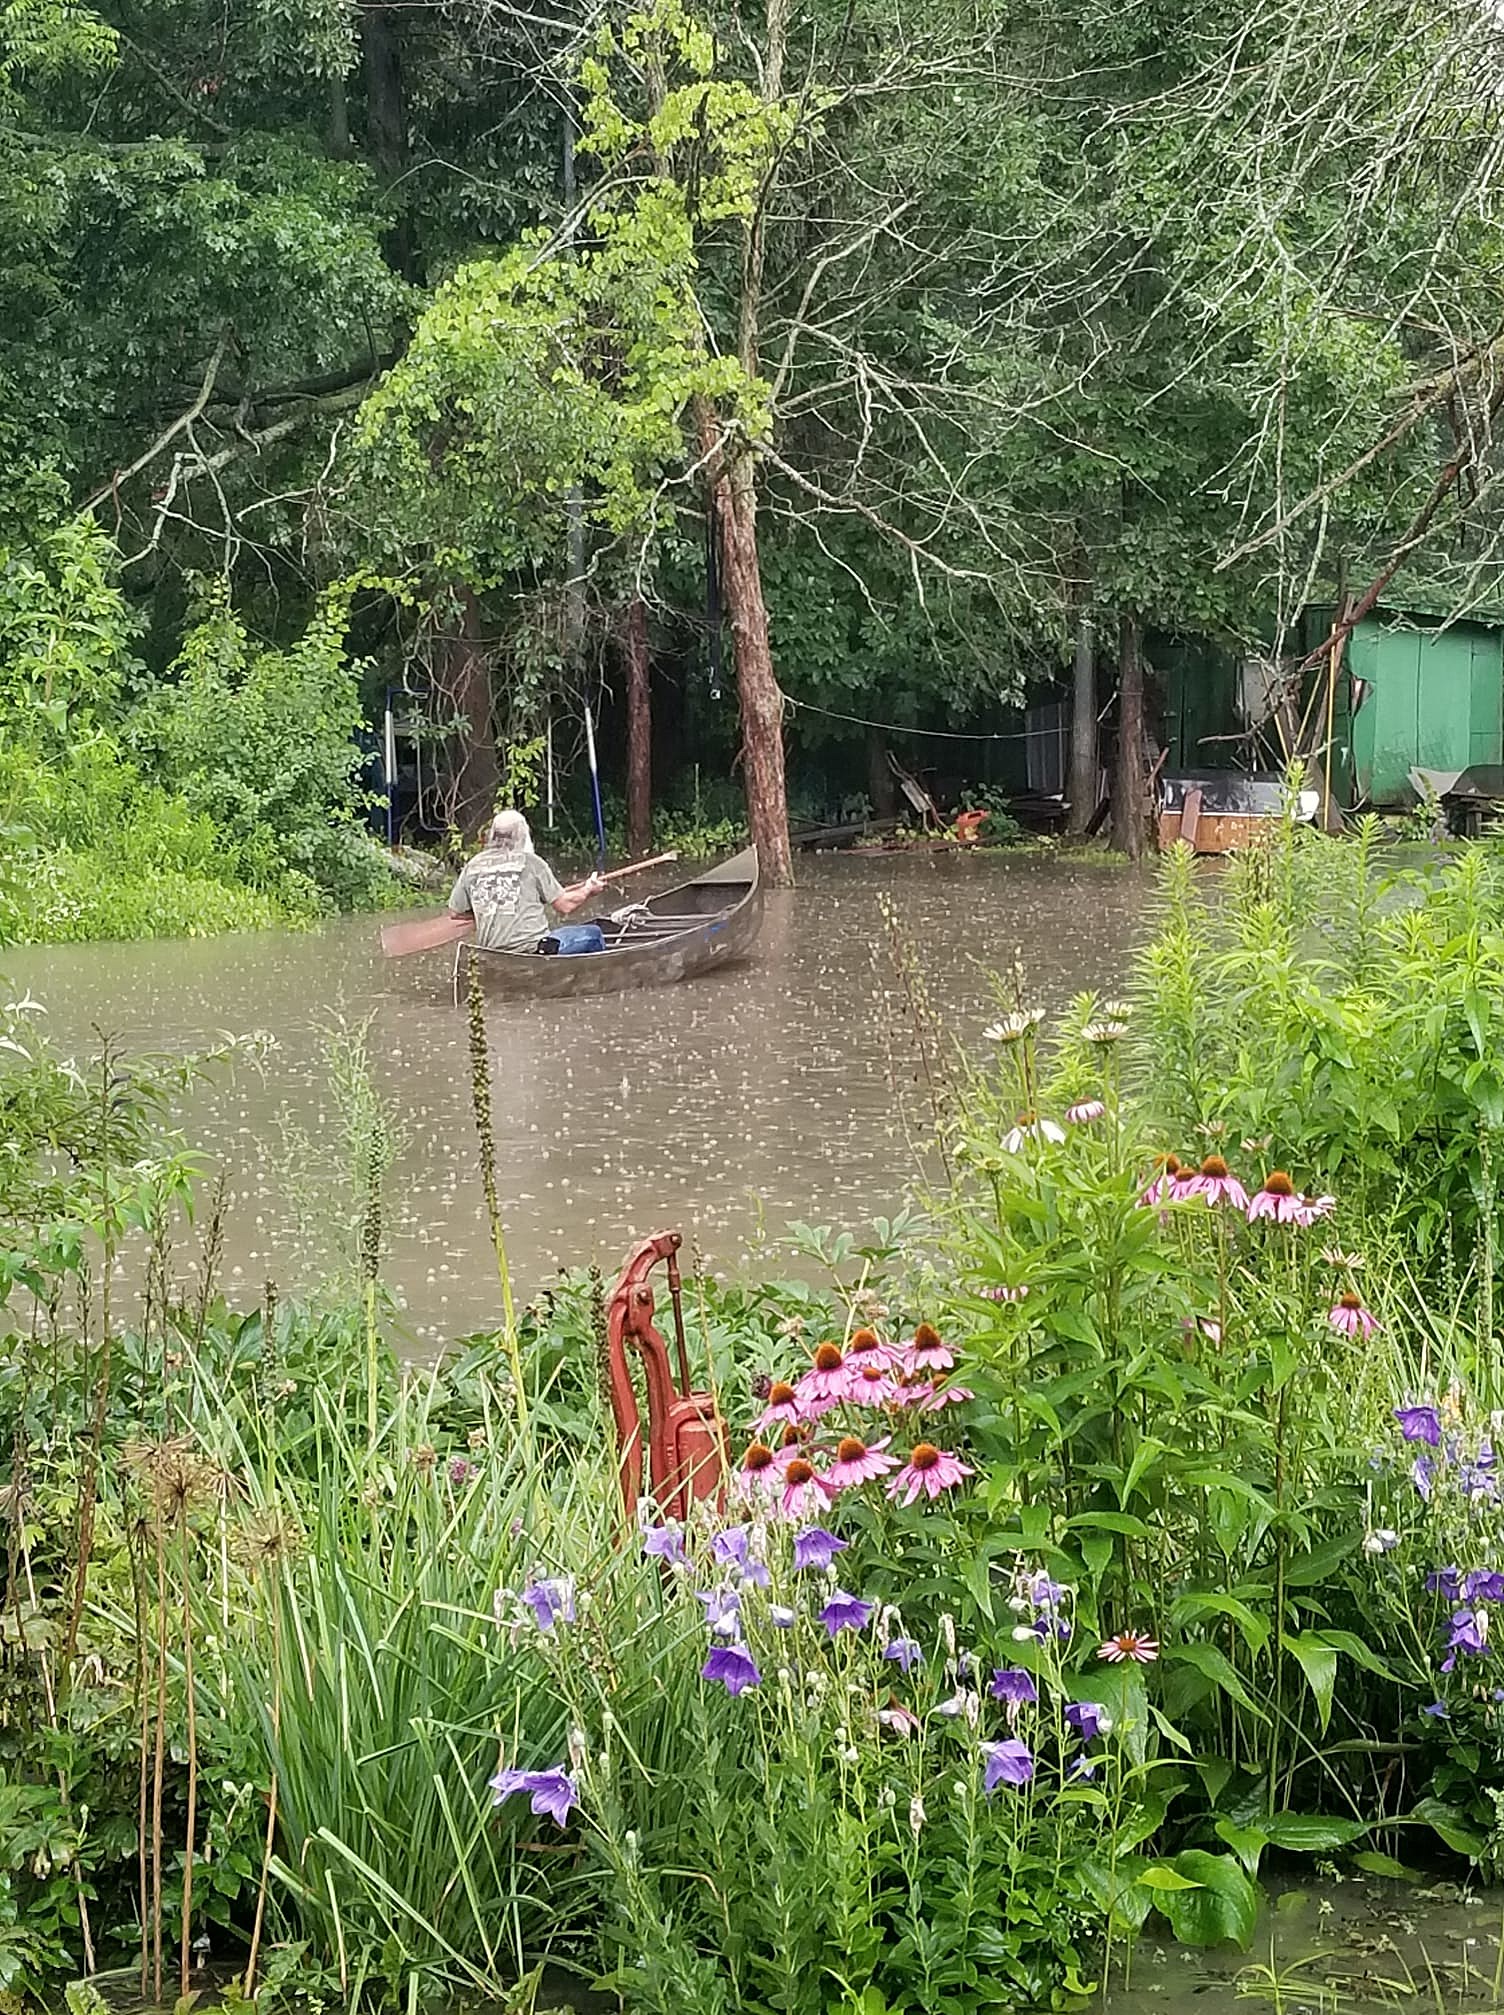 PICTURES: Check Out Some Wild Photos From Yesterday's Flooding